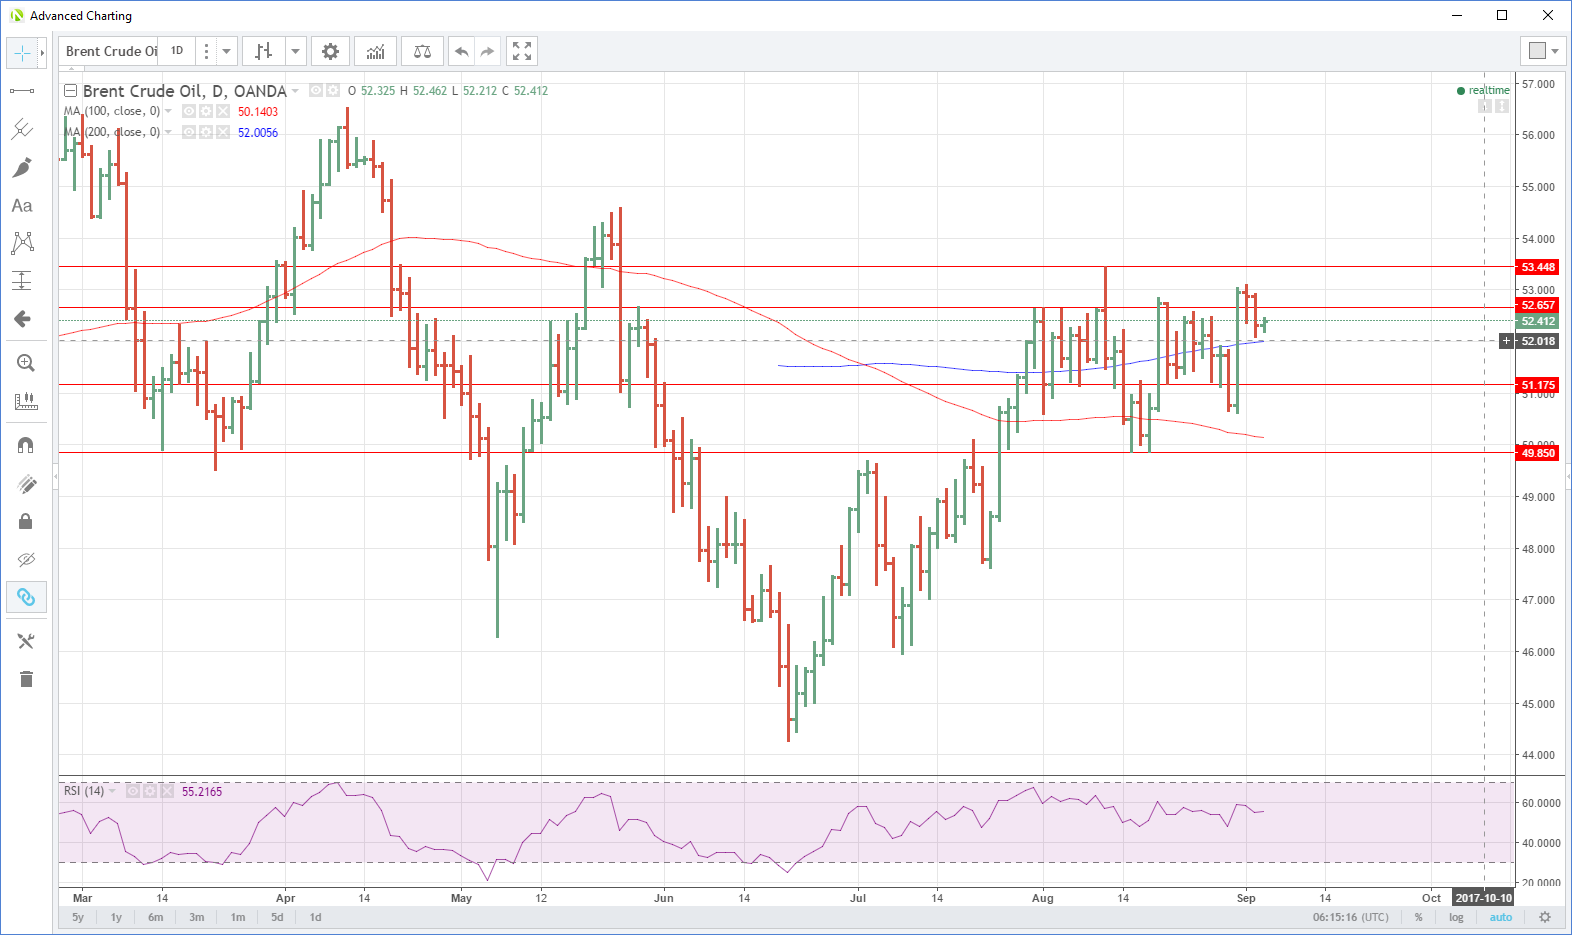 Brent Crude Daily